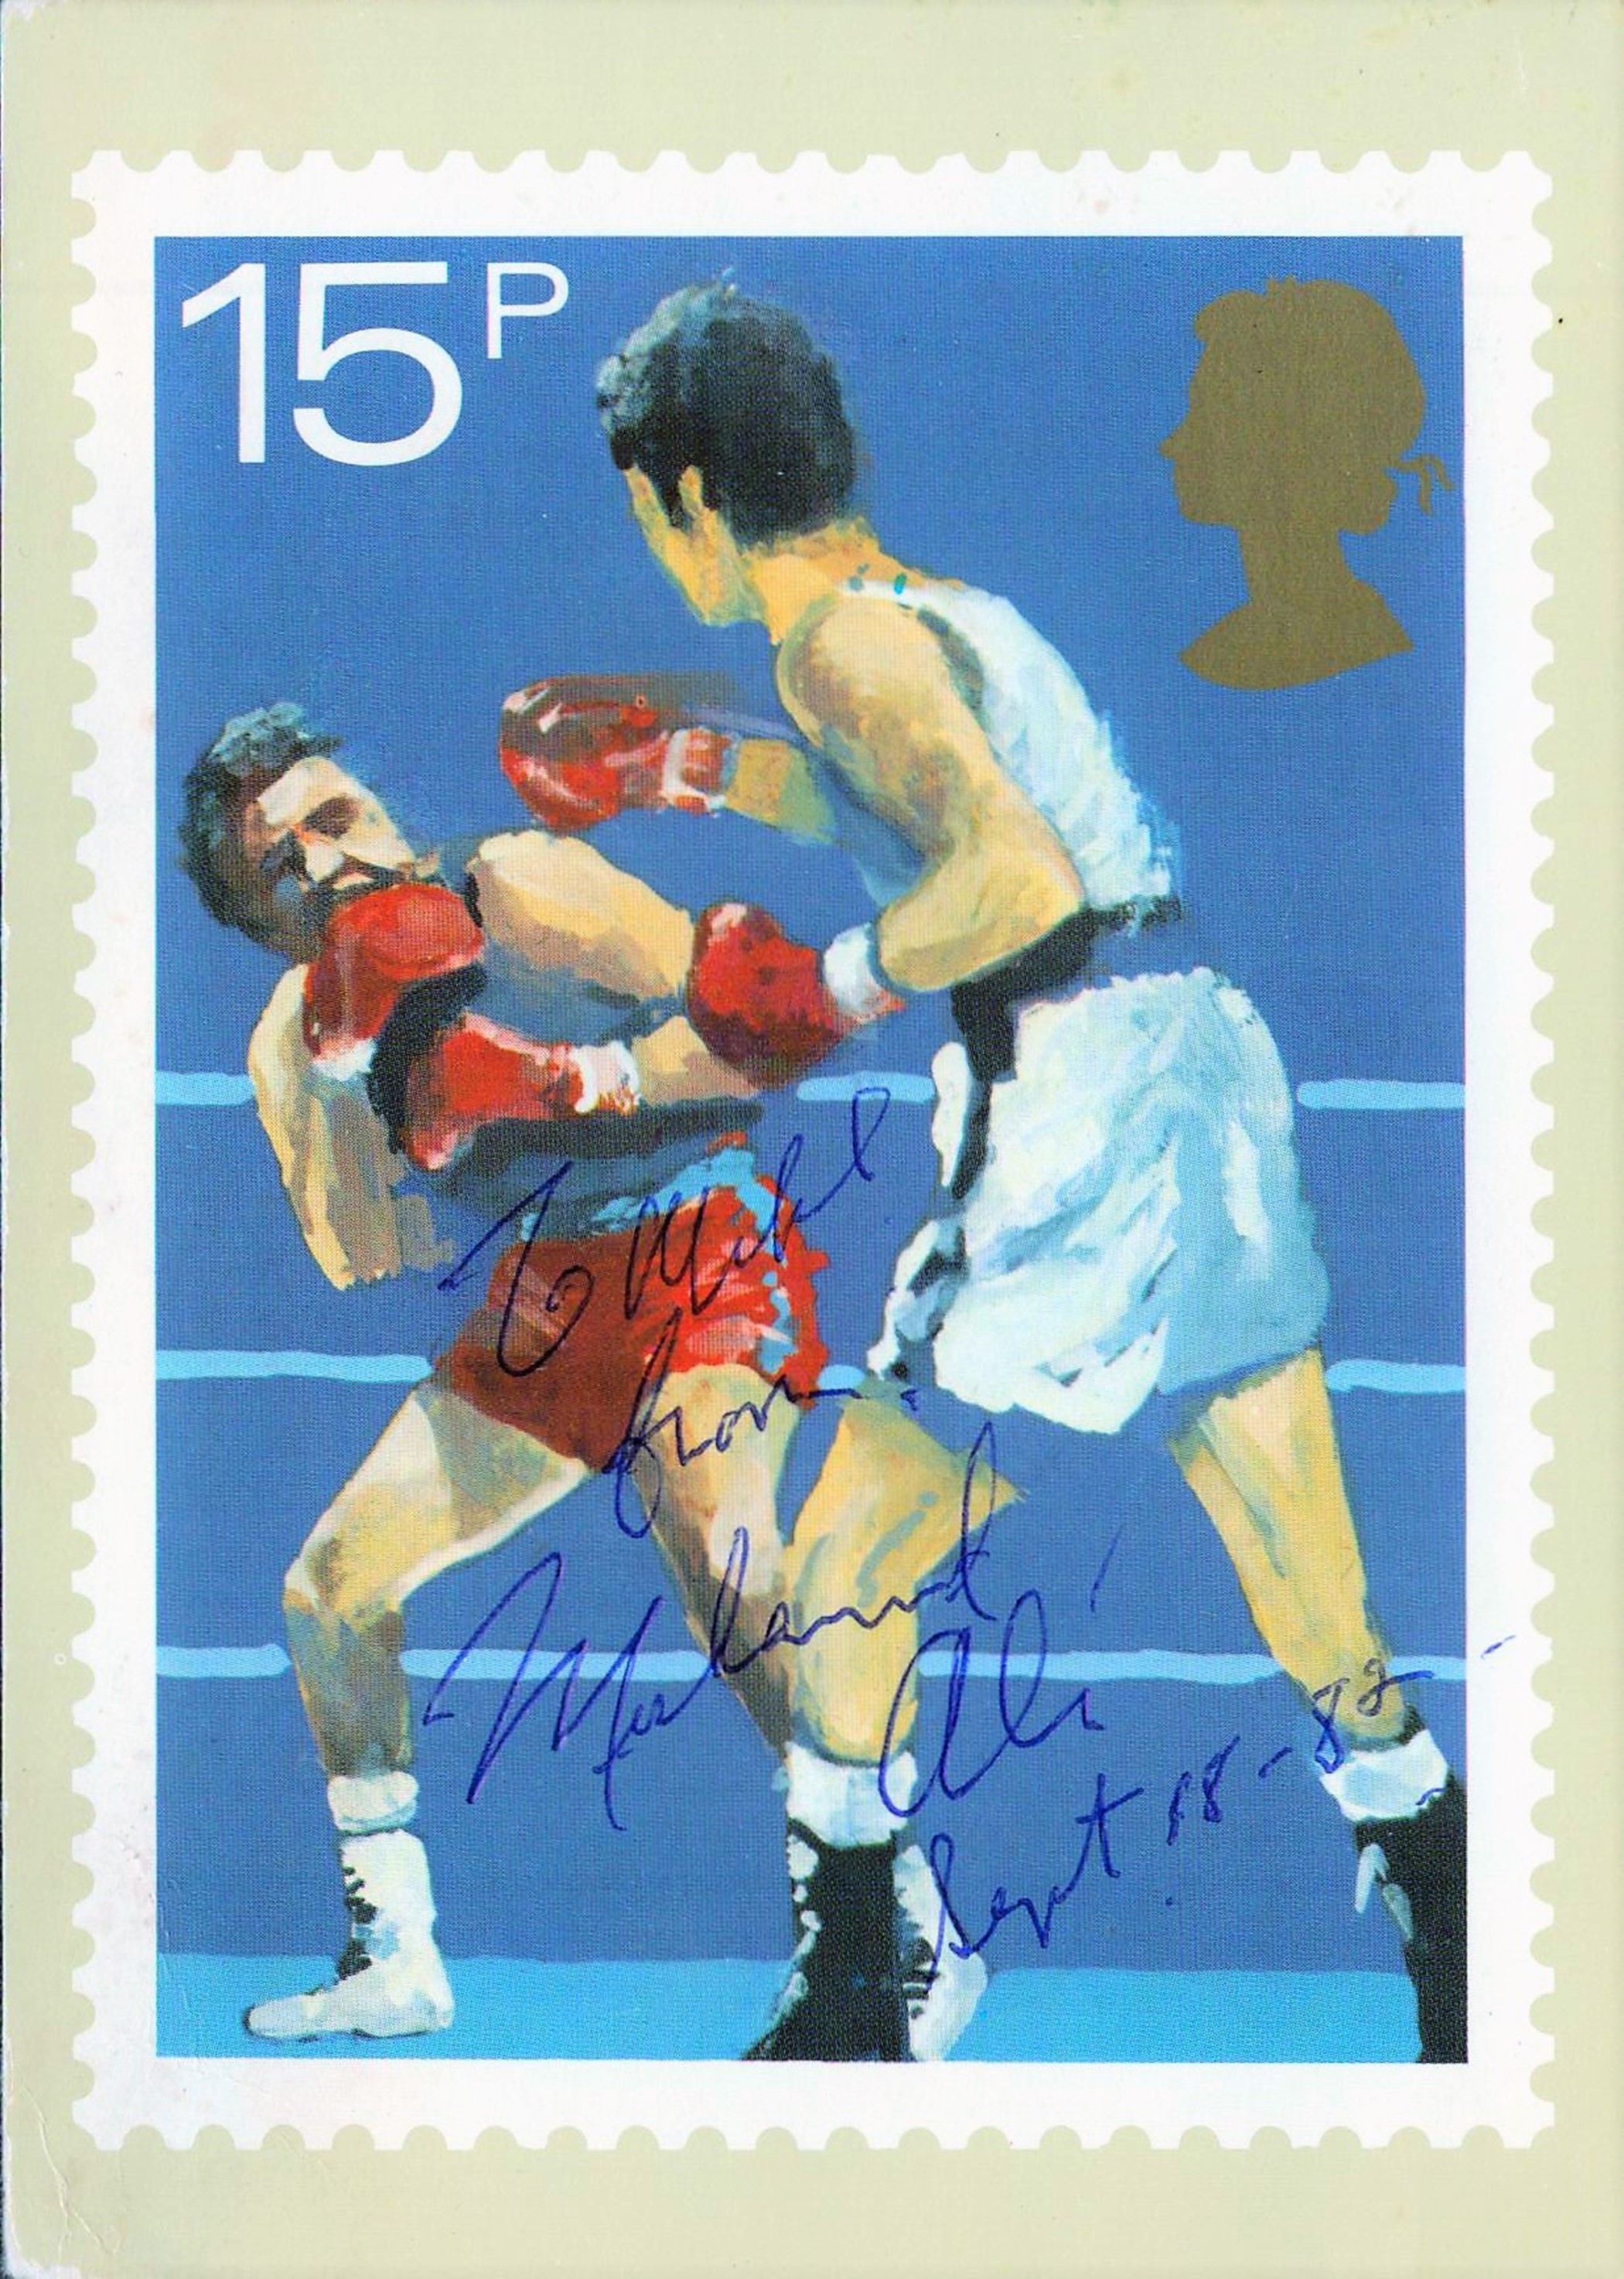 Muhammad Ali signed Post Office Amateur Boxing PHQ card. Muhammad Ali, born Cassius Marcellus Clay